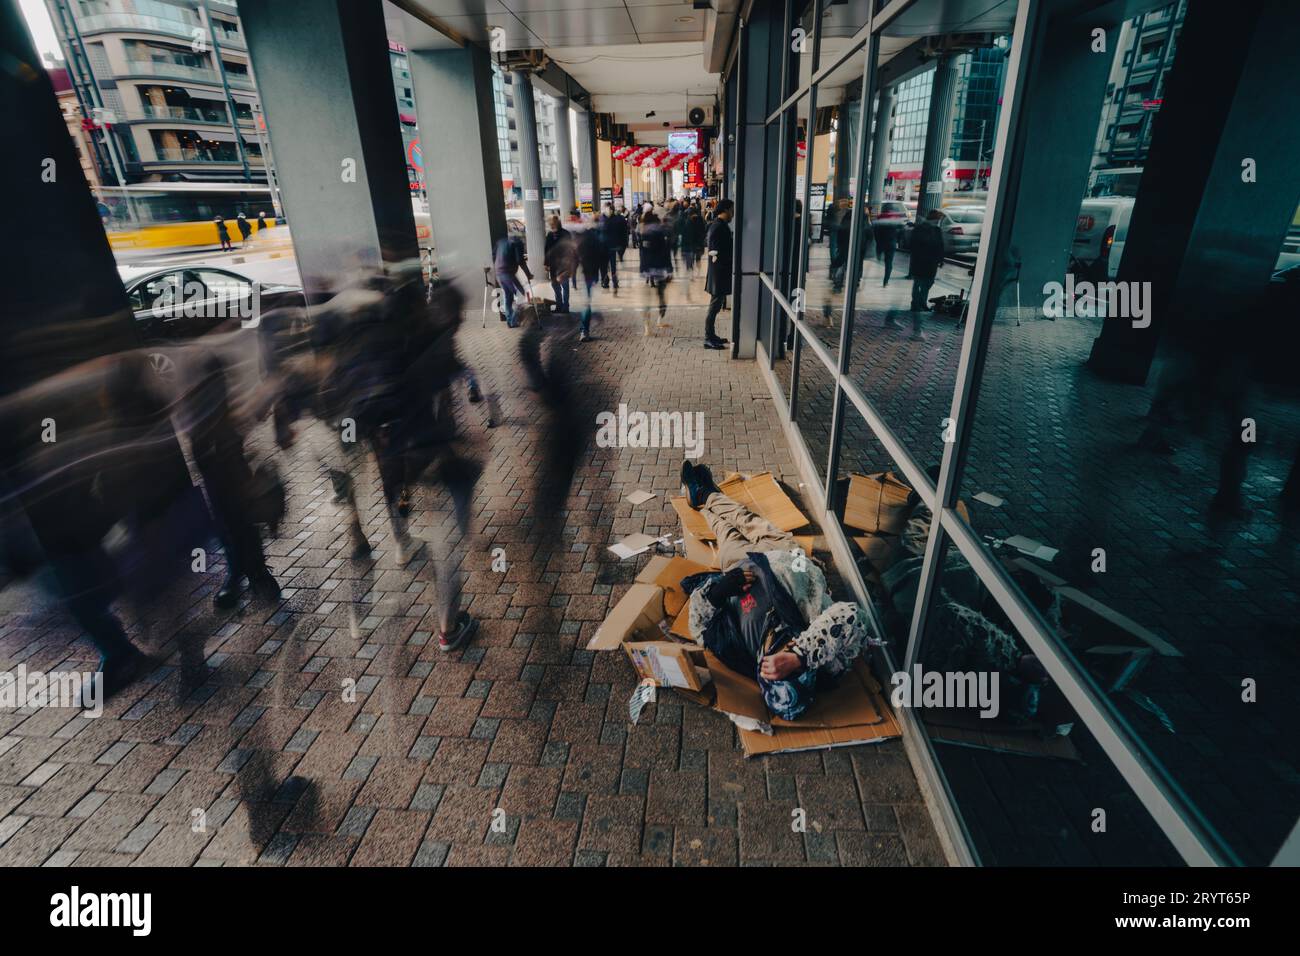 A homeless person lying on the ground outside in a distressed state with people passing by Stock Photo